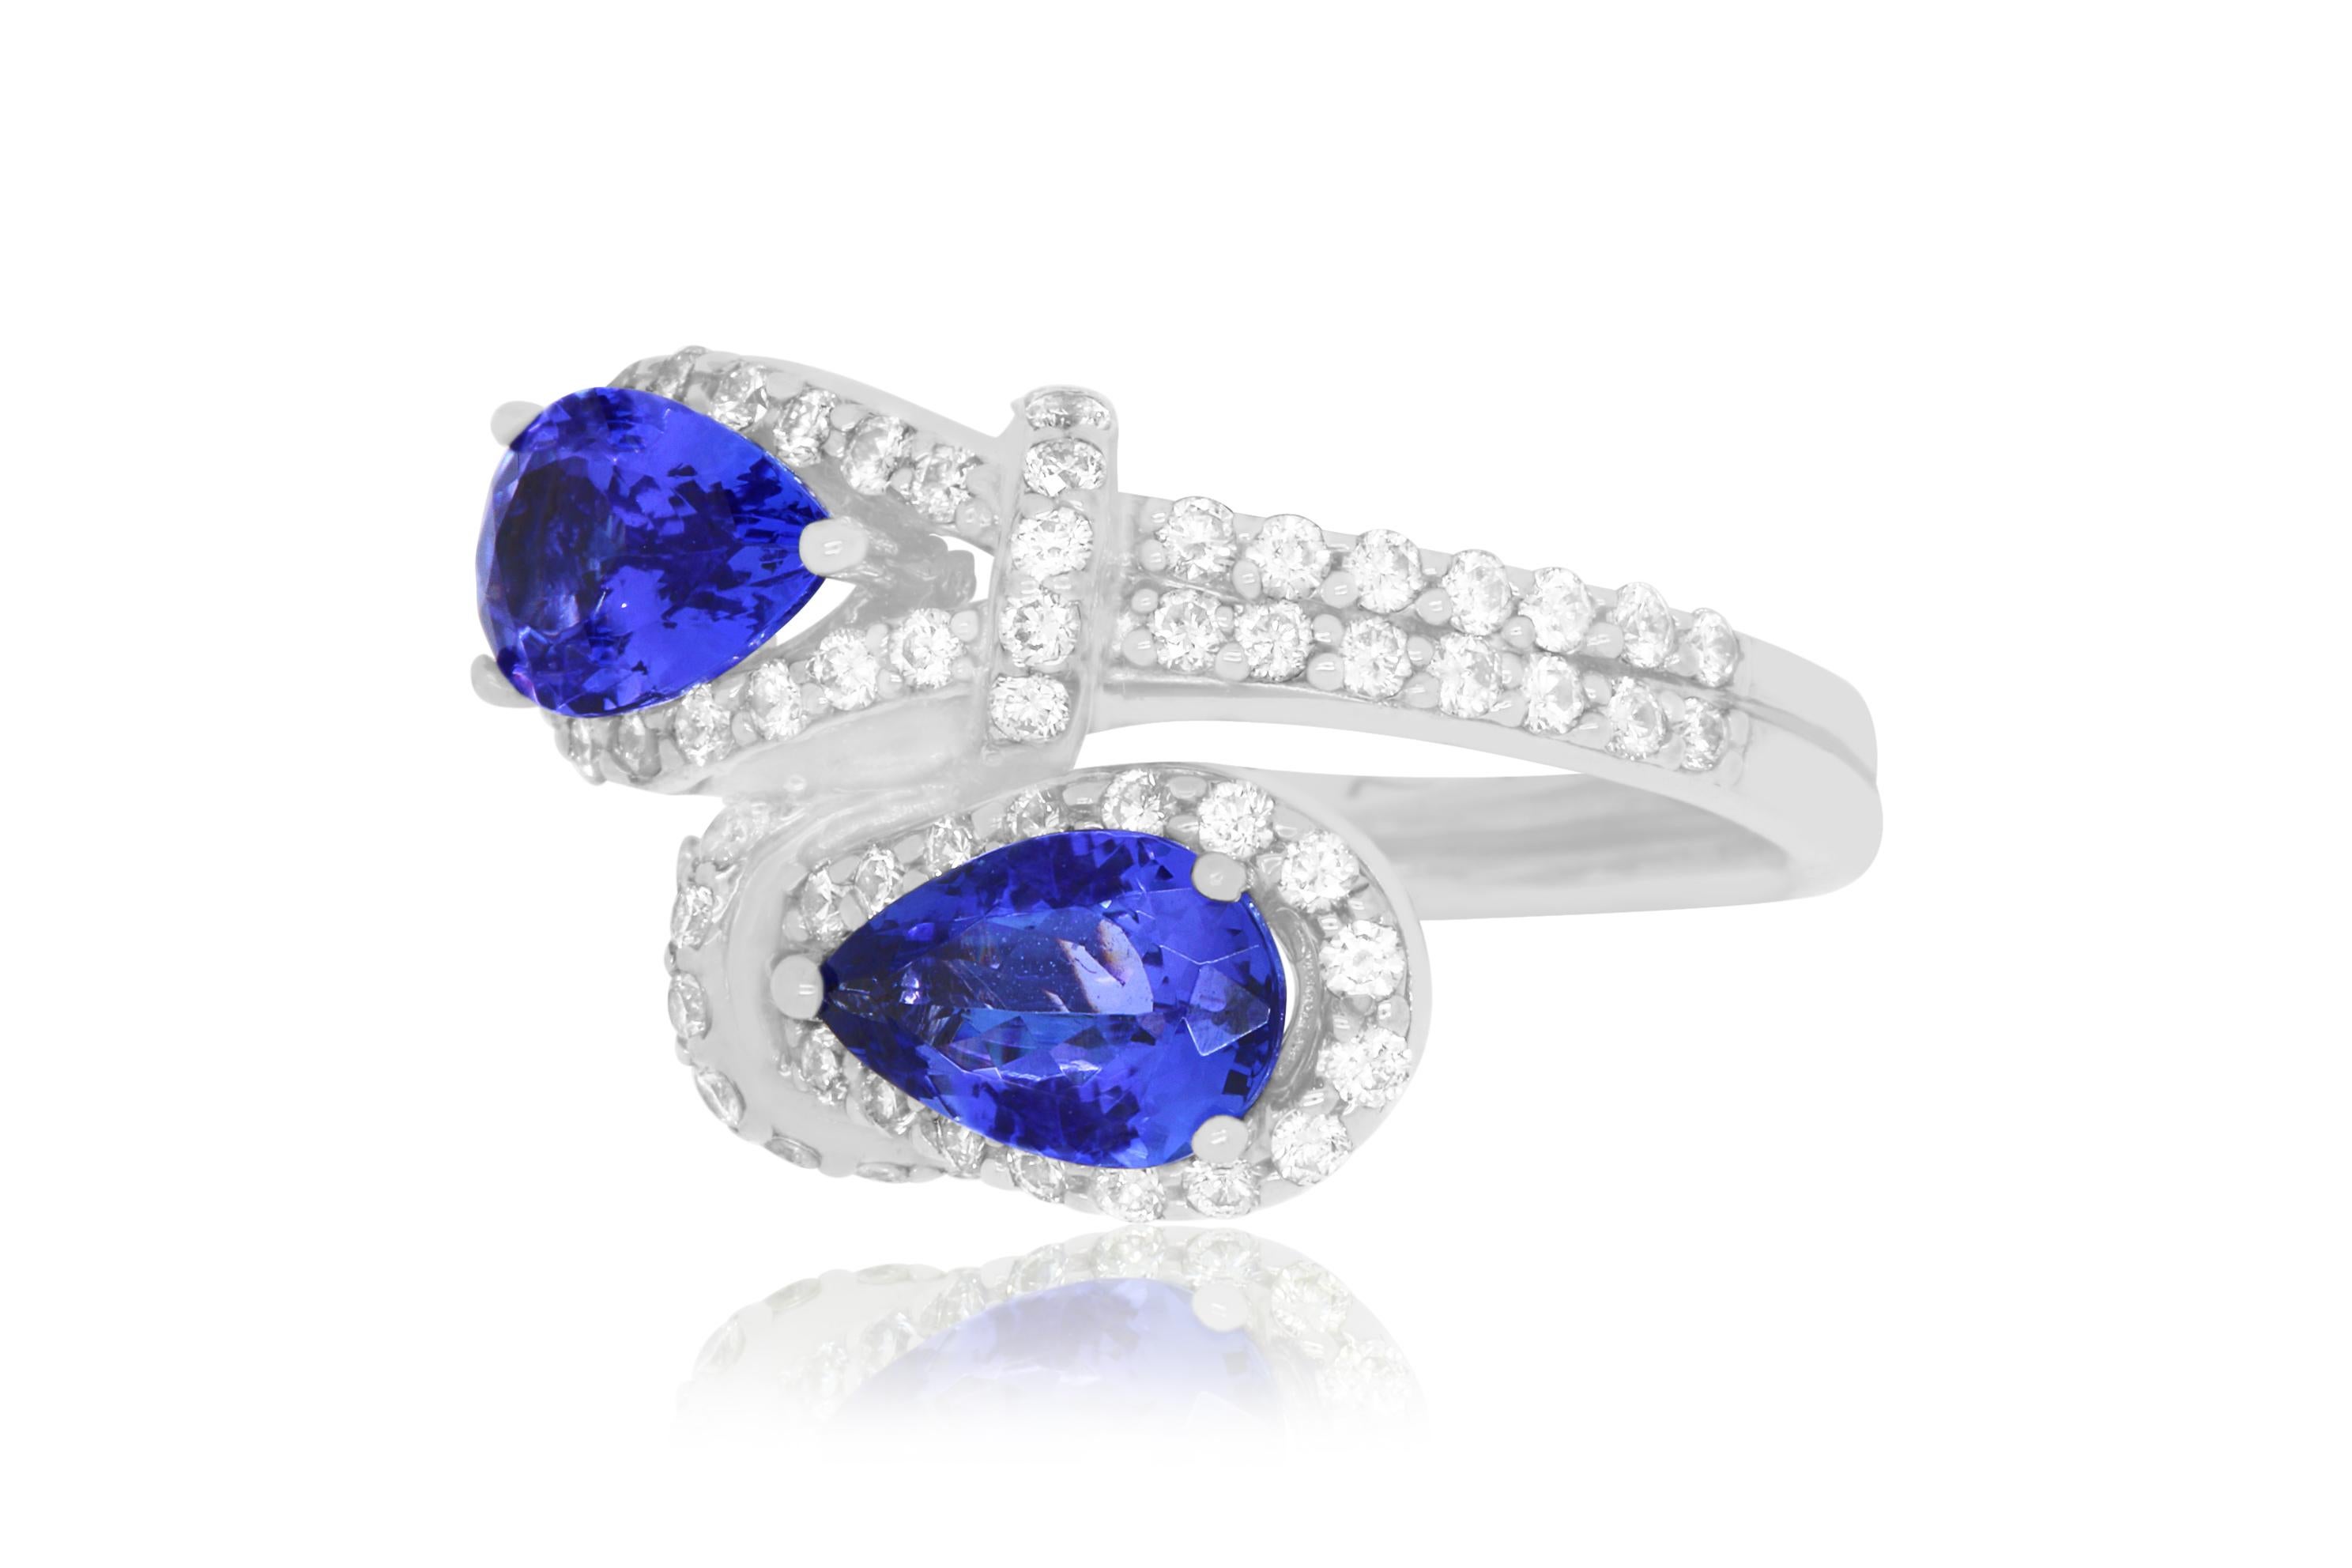 This unique piece features 2 stunning Pear Shaped Tanzanites totaling at 2.52 Carats. Set in 14K white gold and surrounded by brilliant round white diamonds totaling 1 Carat, this ring will wrap your finger in luxury!

Material: 14k White